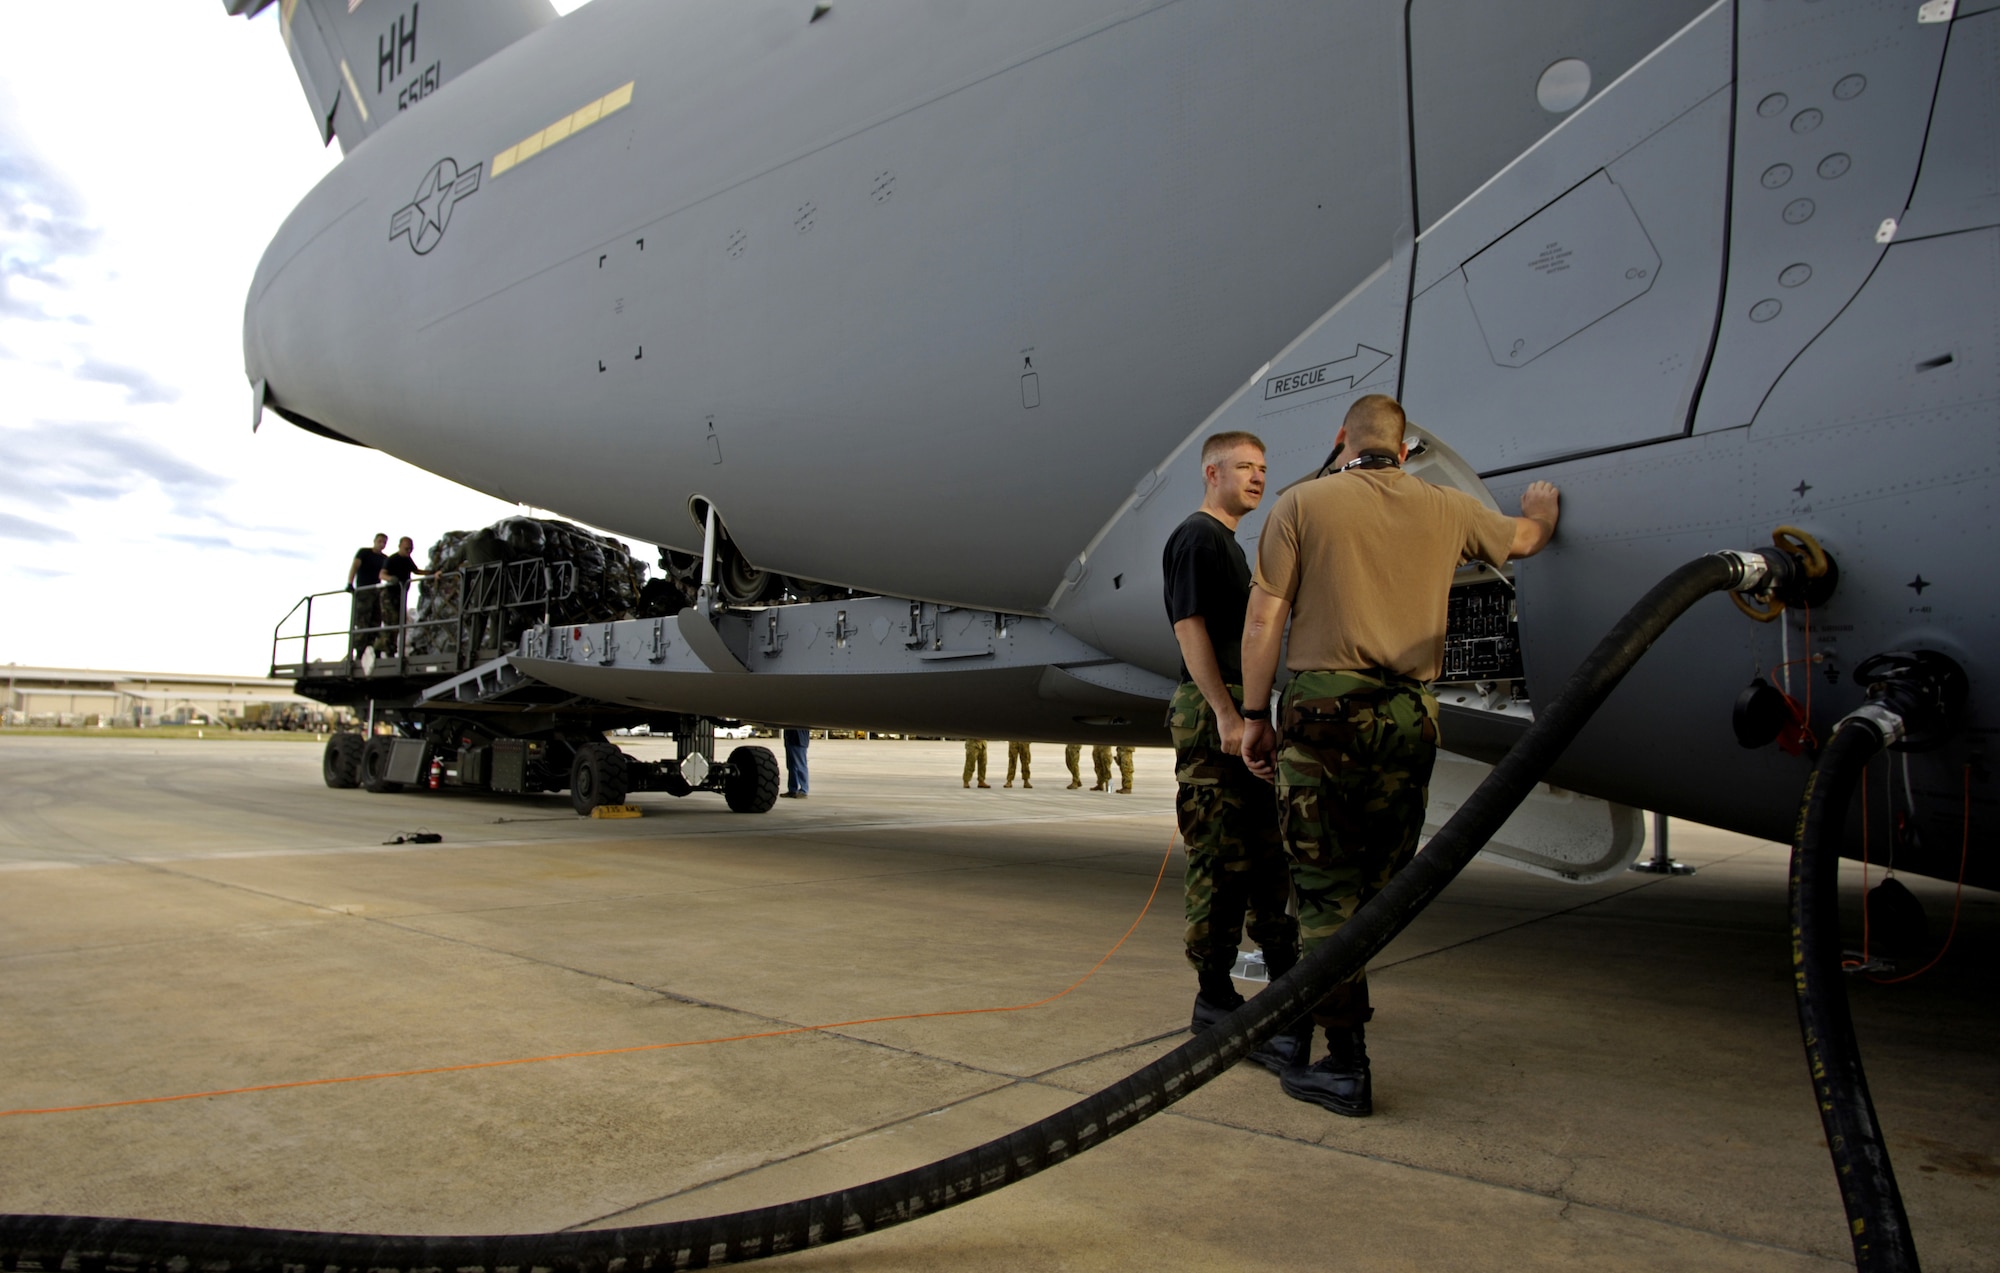 060530-F-2034C-021
Staff Sgt. Marcus Sorrells and Tech. Sgt. Jeremy Barber refuel a C-17 Globemaster III May 30, 2006 at Royal Australian Air Force Base Townsville, Australia. Sgt.?s Sorrells and Barber are from the 15th Maintenance Squadron Hickam Air Force Base, Hawaii. Two C-17?s from the 15th Airlift Wing and 154th Wing Hawaii Air National Guars, Hickam are helping the Australian Defense Force reposition its forces in Australian to better support the peace operations in East Timor. (U.S. Air Force photo by Tech. Sgt. Shane A. Cuomo)
